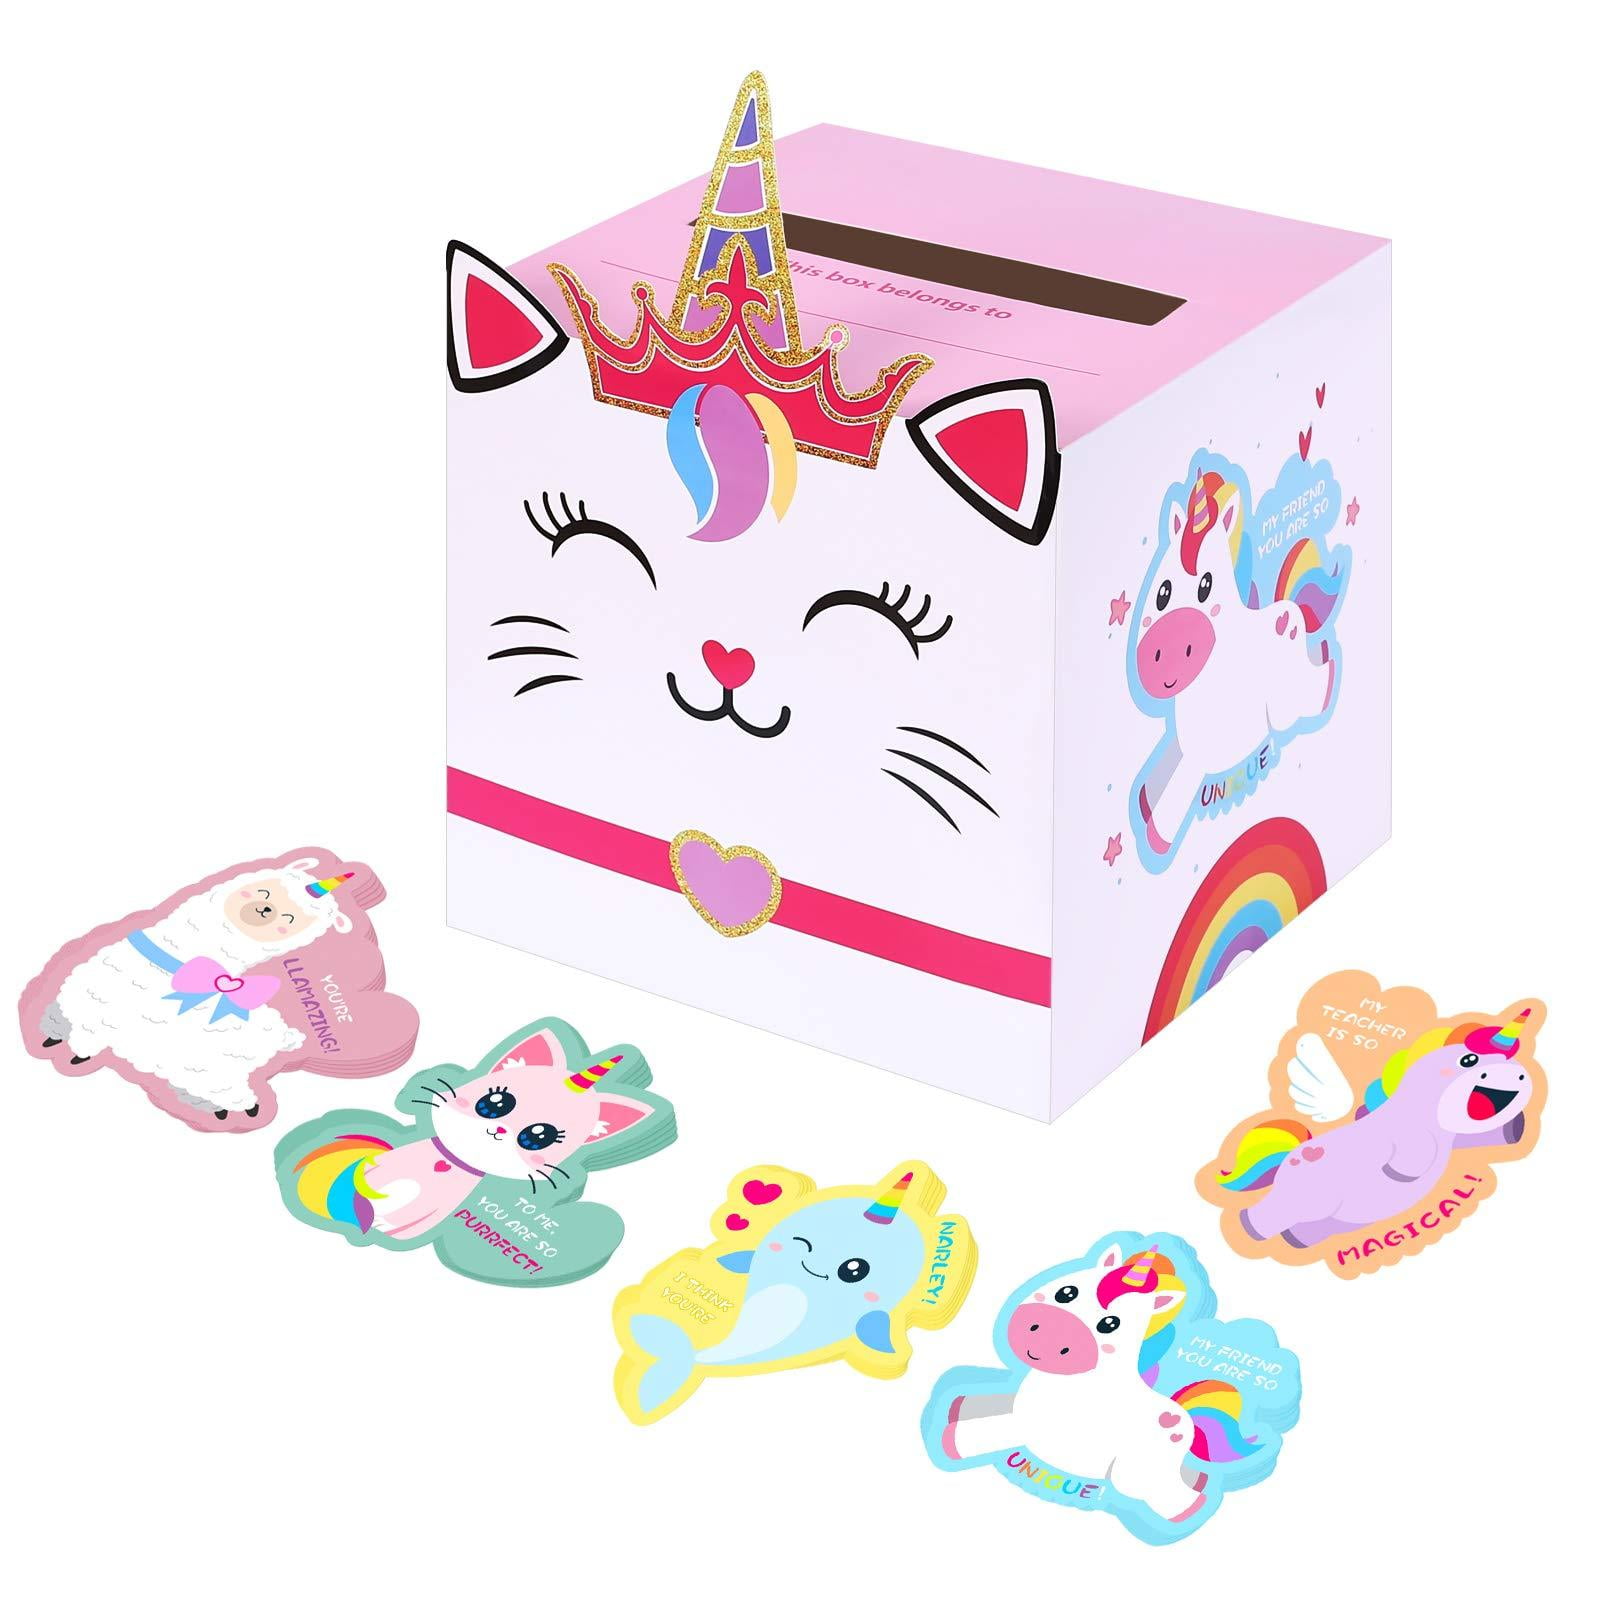 Valentine Boxes for Kids - Unicorn Valentines Day Cards for Kids and Mailbox for Classroom Exchange & Greeting, Kids Valentines Gift for Party Favor